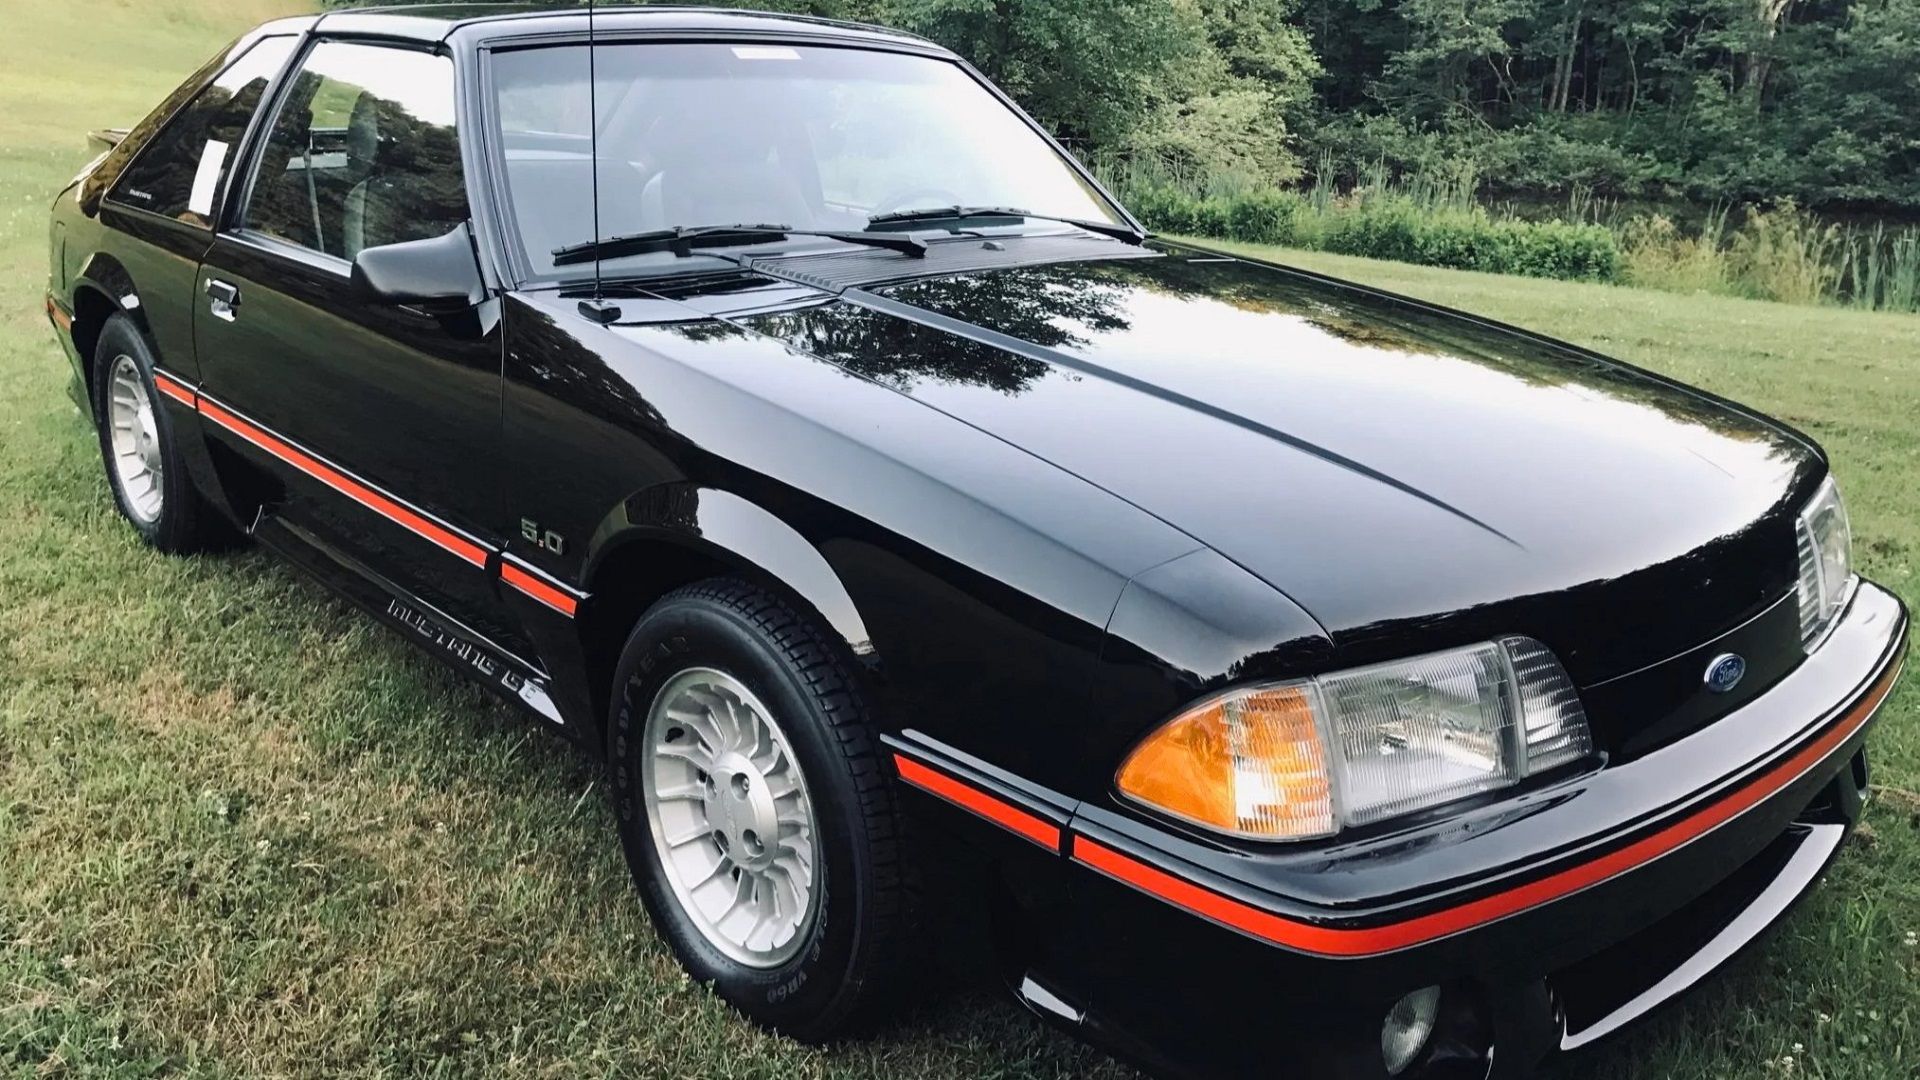 A parked 1987 Mustang Foxbody 5.0 on display